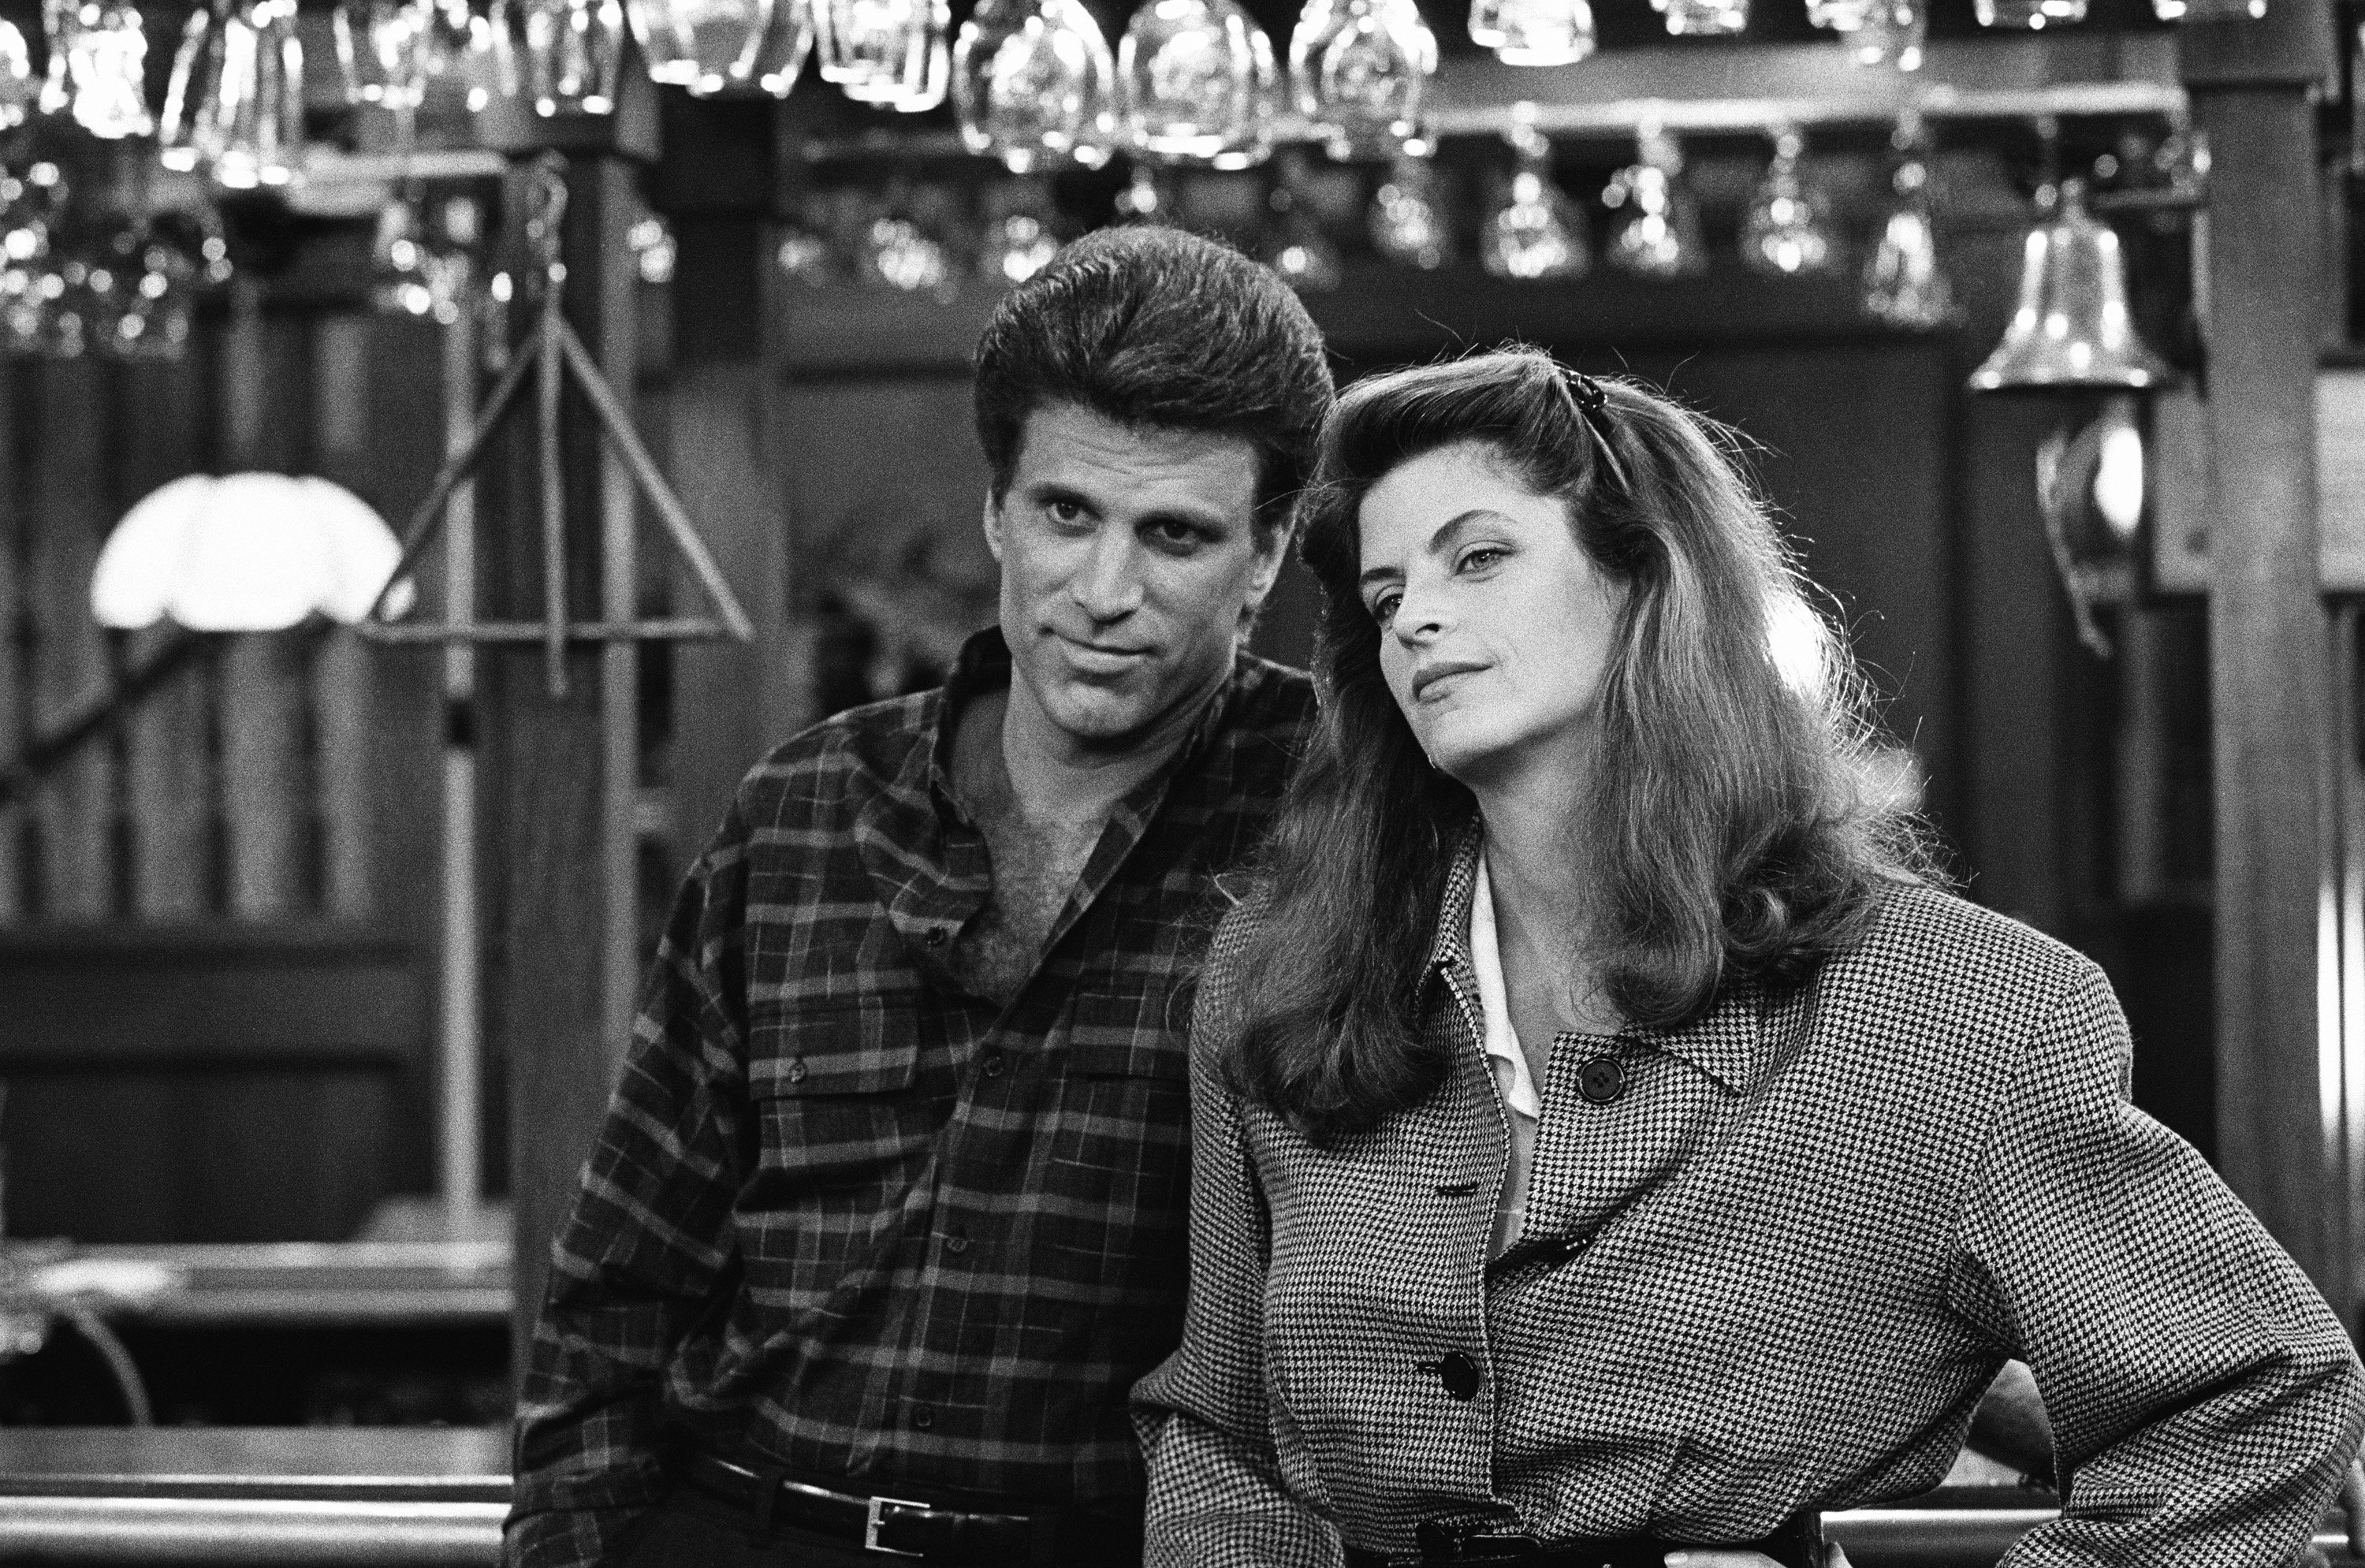 Ted Danson as Sam Malone, Kirstie Alley as Rebecca Howe in "Cheers," 1987. | Source: Getty Images